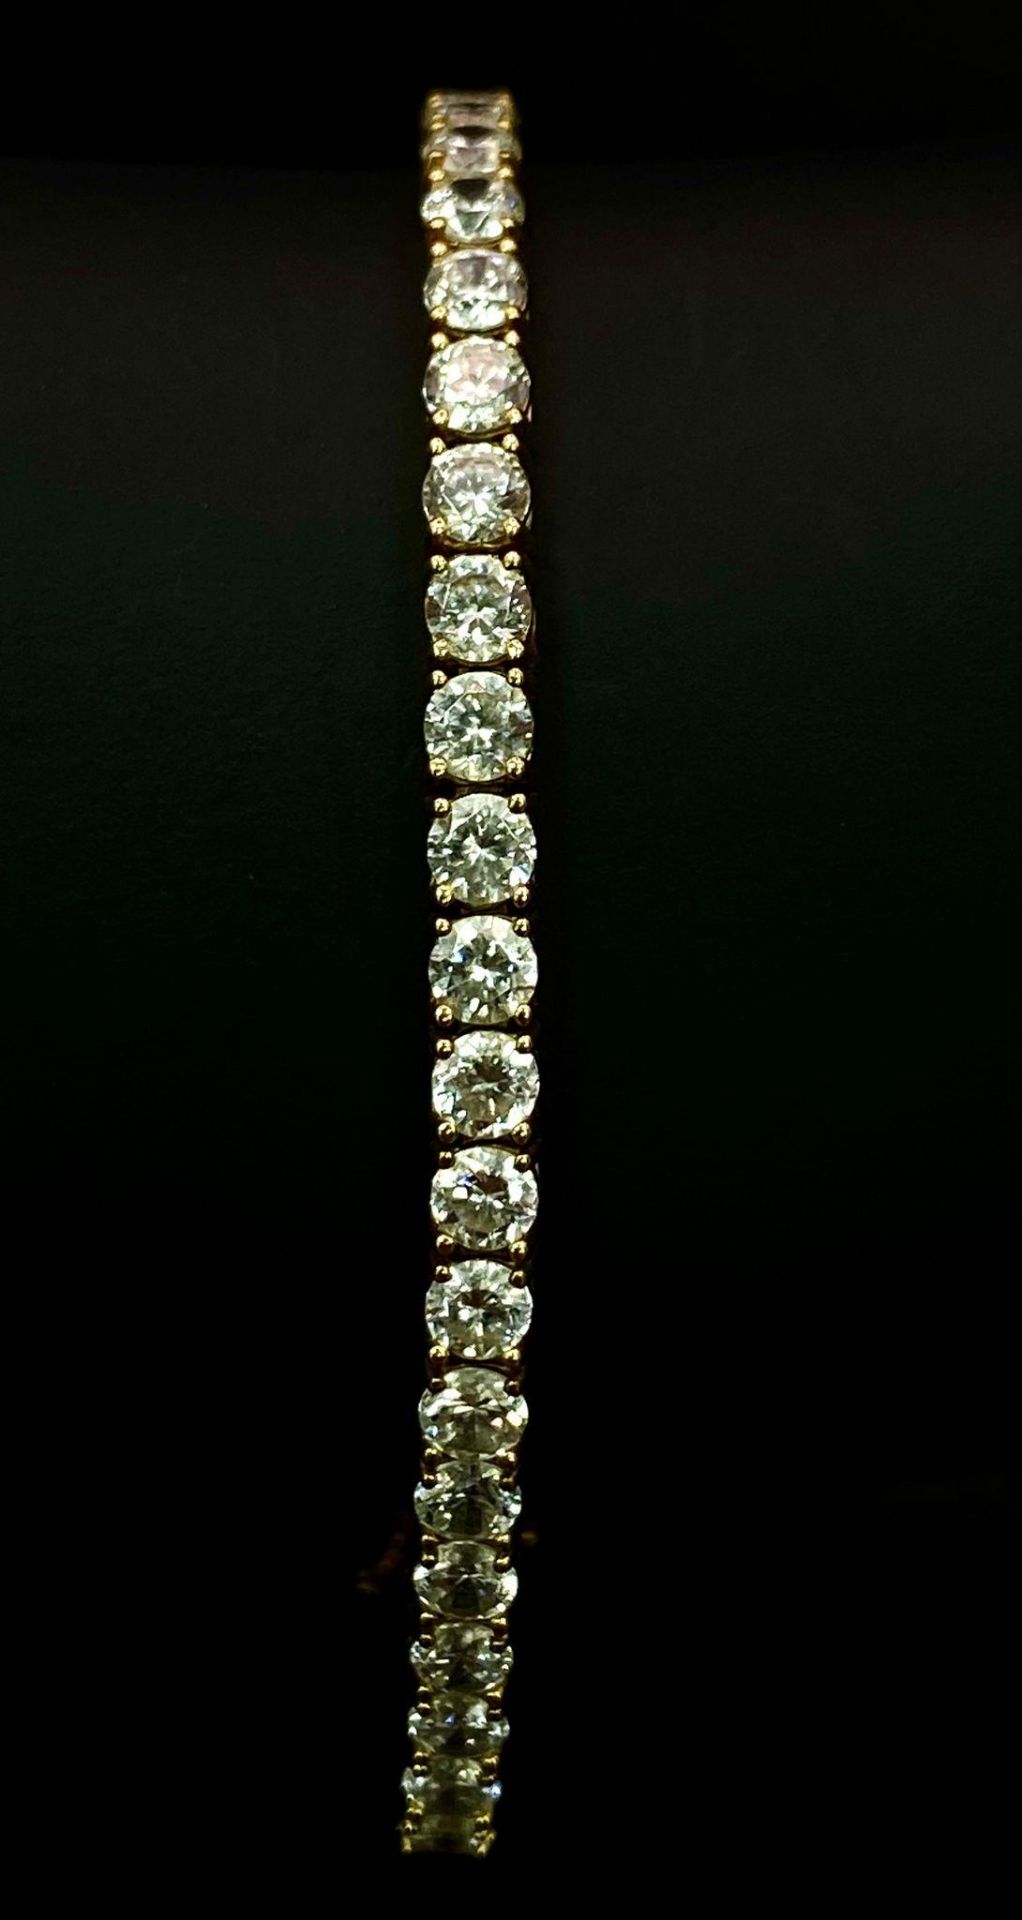 A STUNNING 14K GOLD TENNIS BRACELET WITH BRIGHT SPARKLING ZIRCONIA STONES. 9.8gms - Image 2 of 5